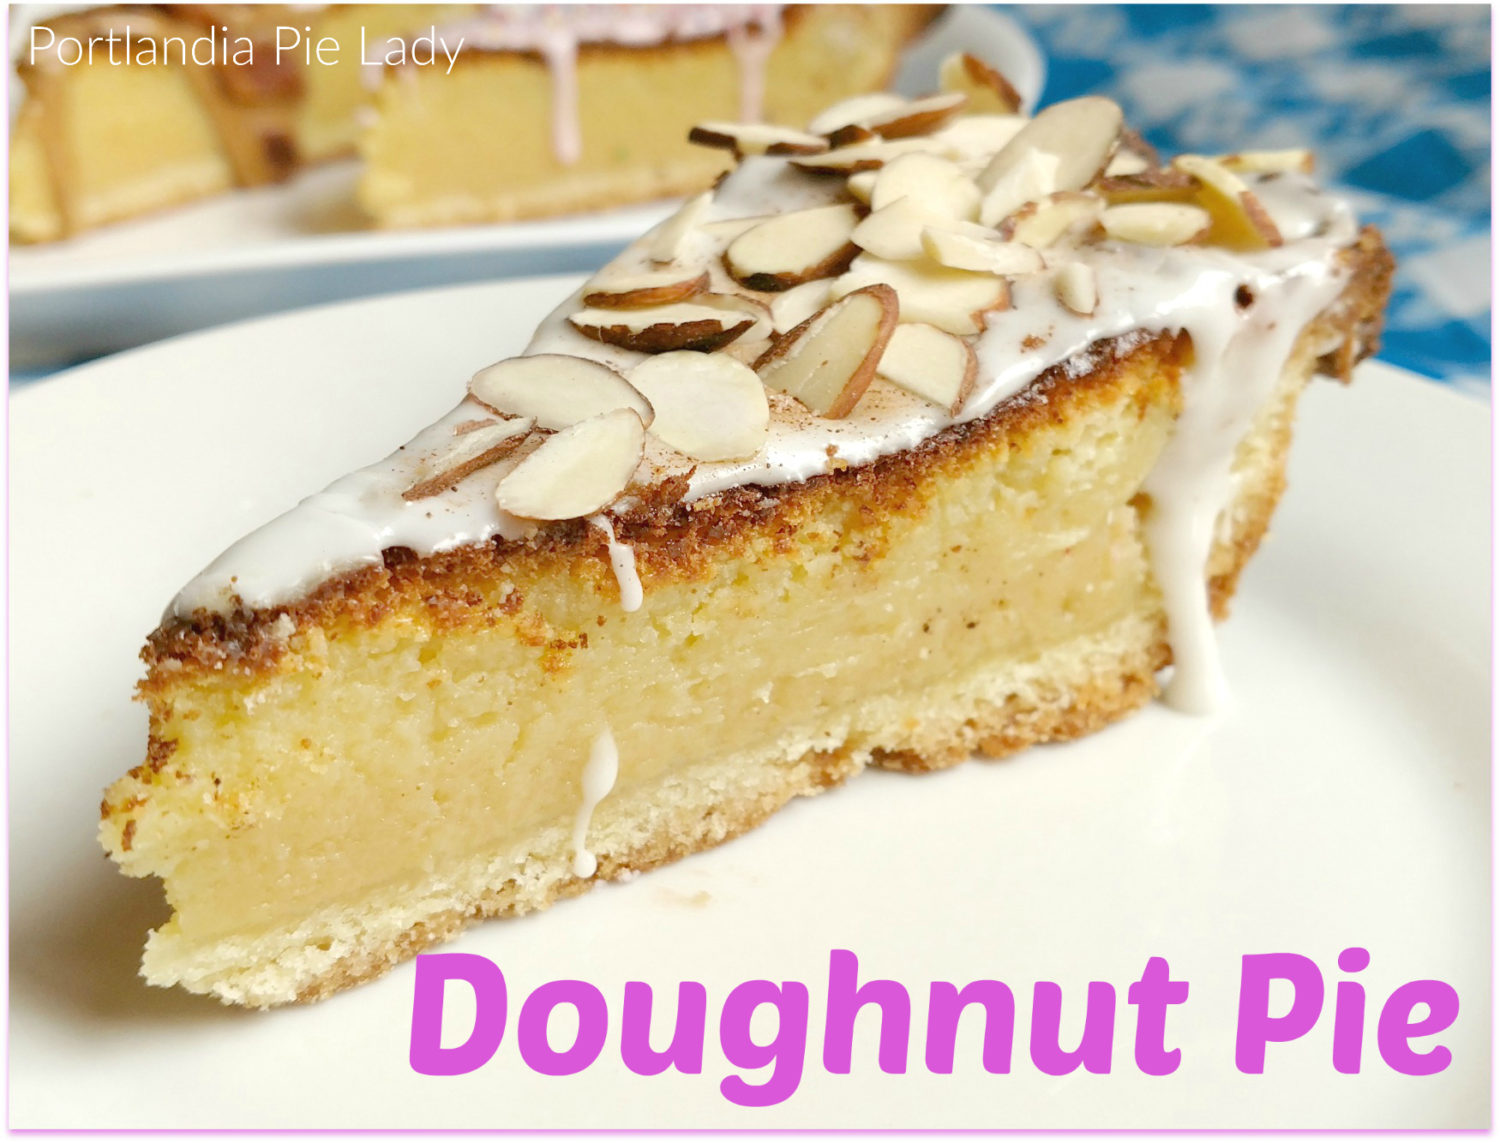 Doughnut Pie! Design your favorite doughnut flavor on each slice. The filling is tender, soft and vanilla fudgy in a flaky crust.